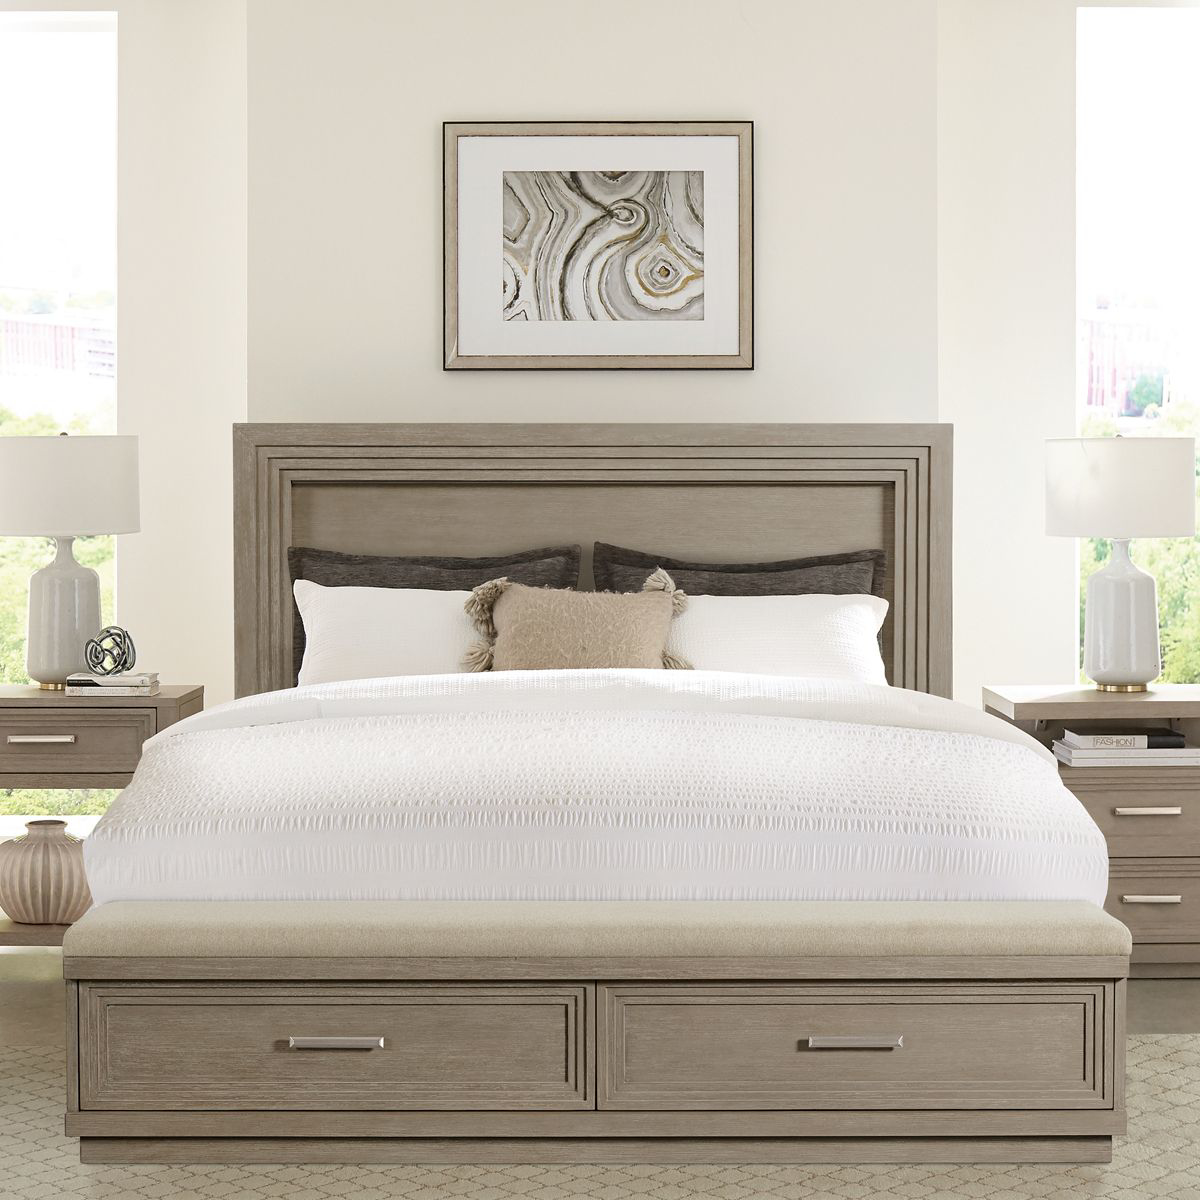 Picture of CASCADE KING BED W/STOR & LITE